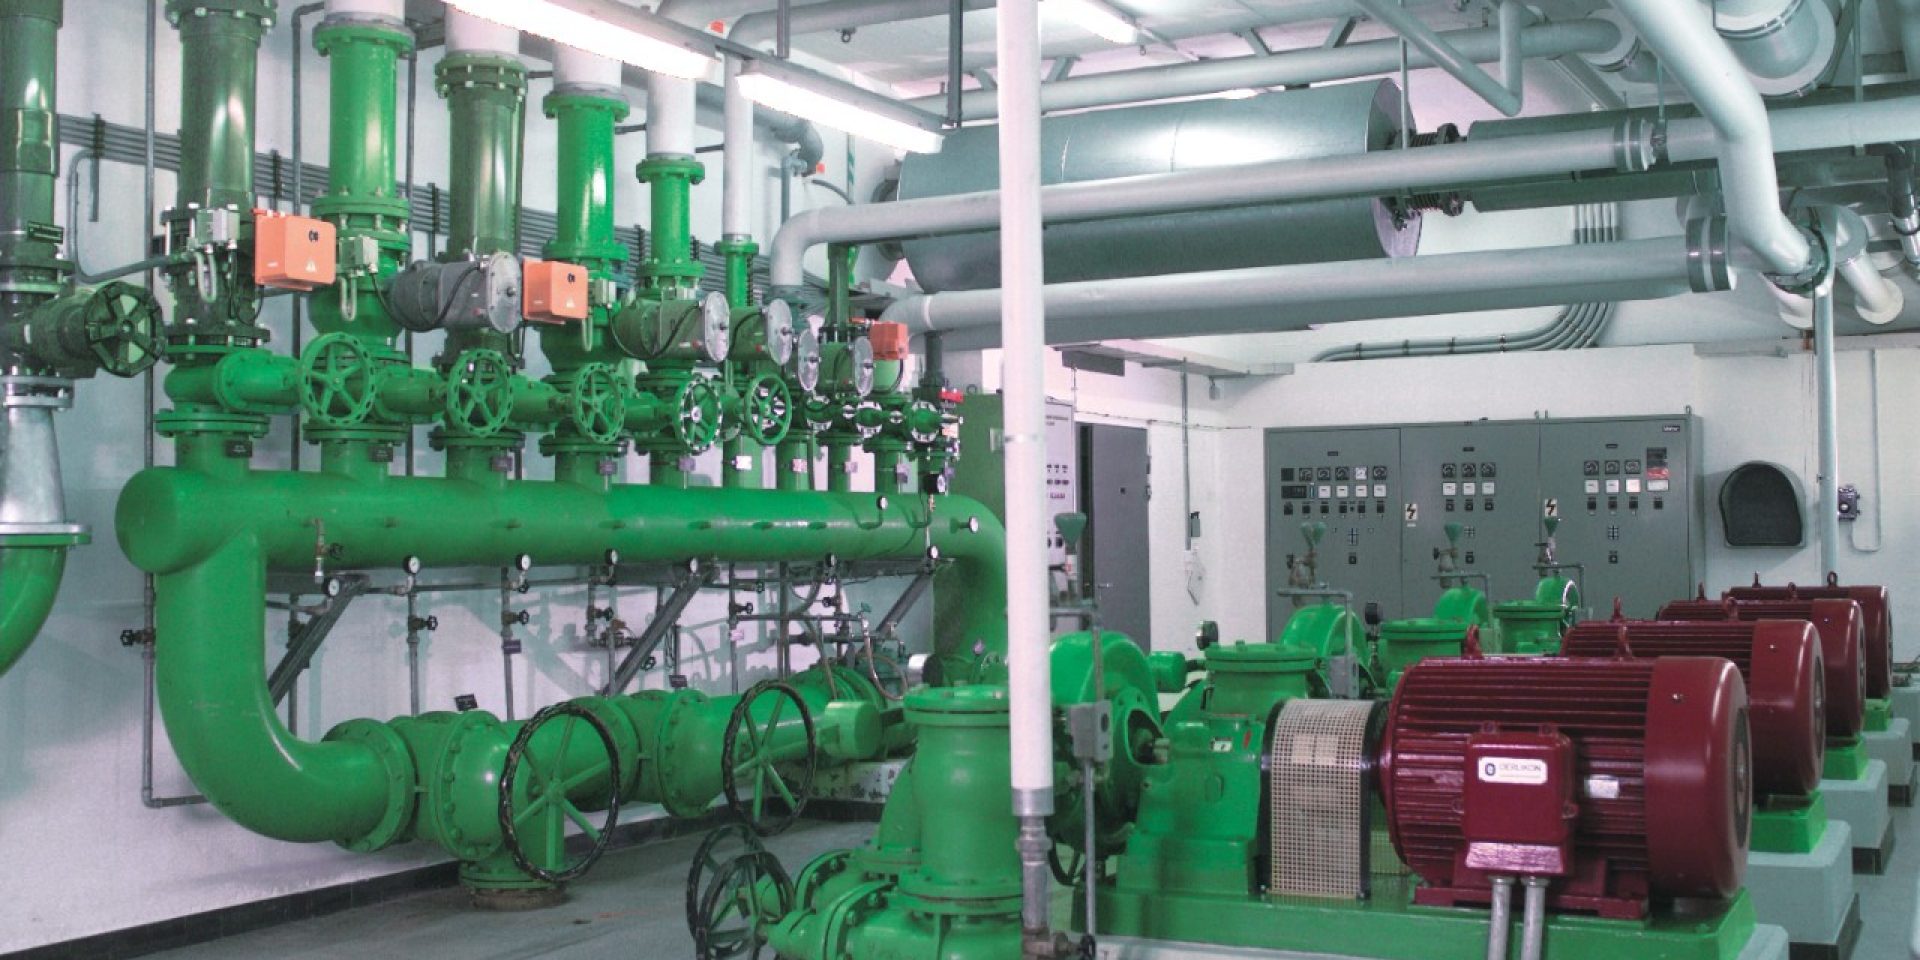 Mechanical applications showing piping and ventilation